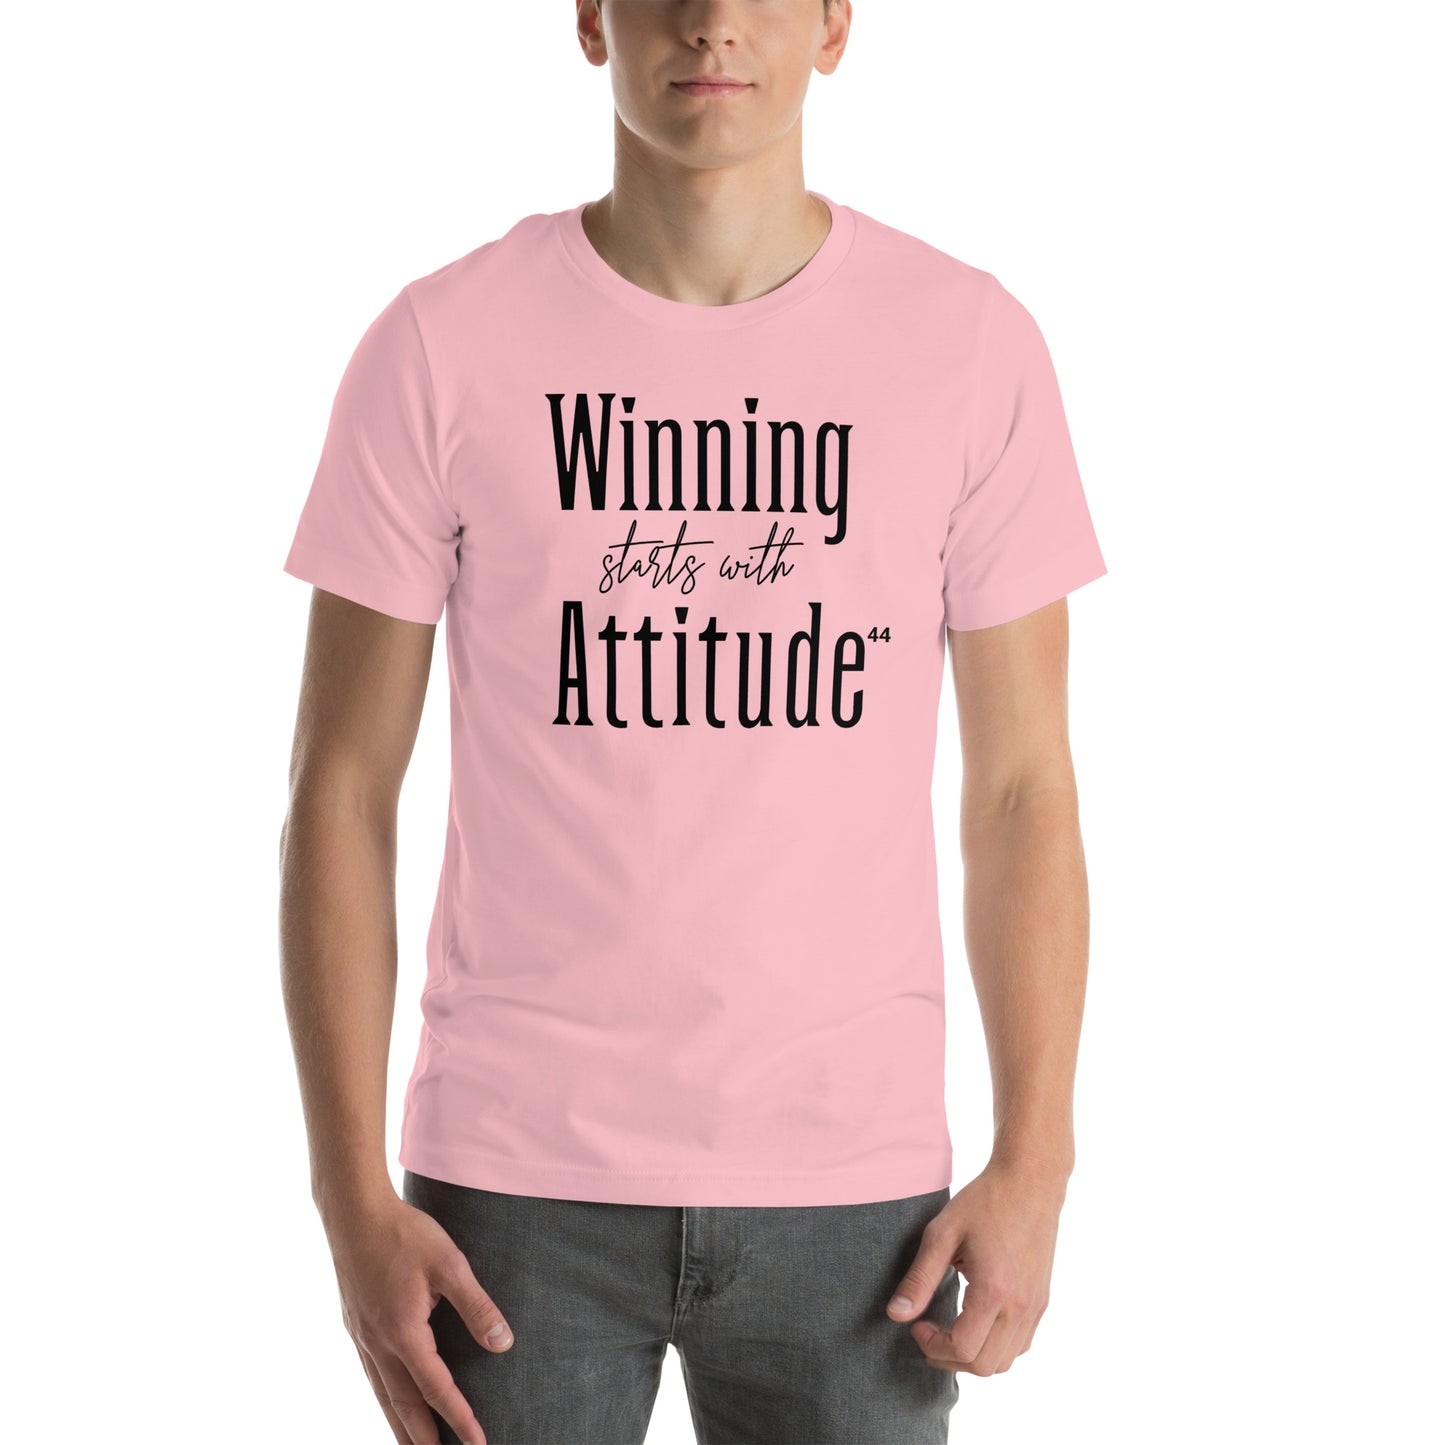 WINNING STARTS WITH YOUR ATTITUDE.